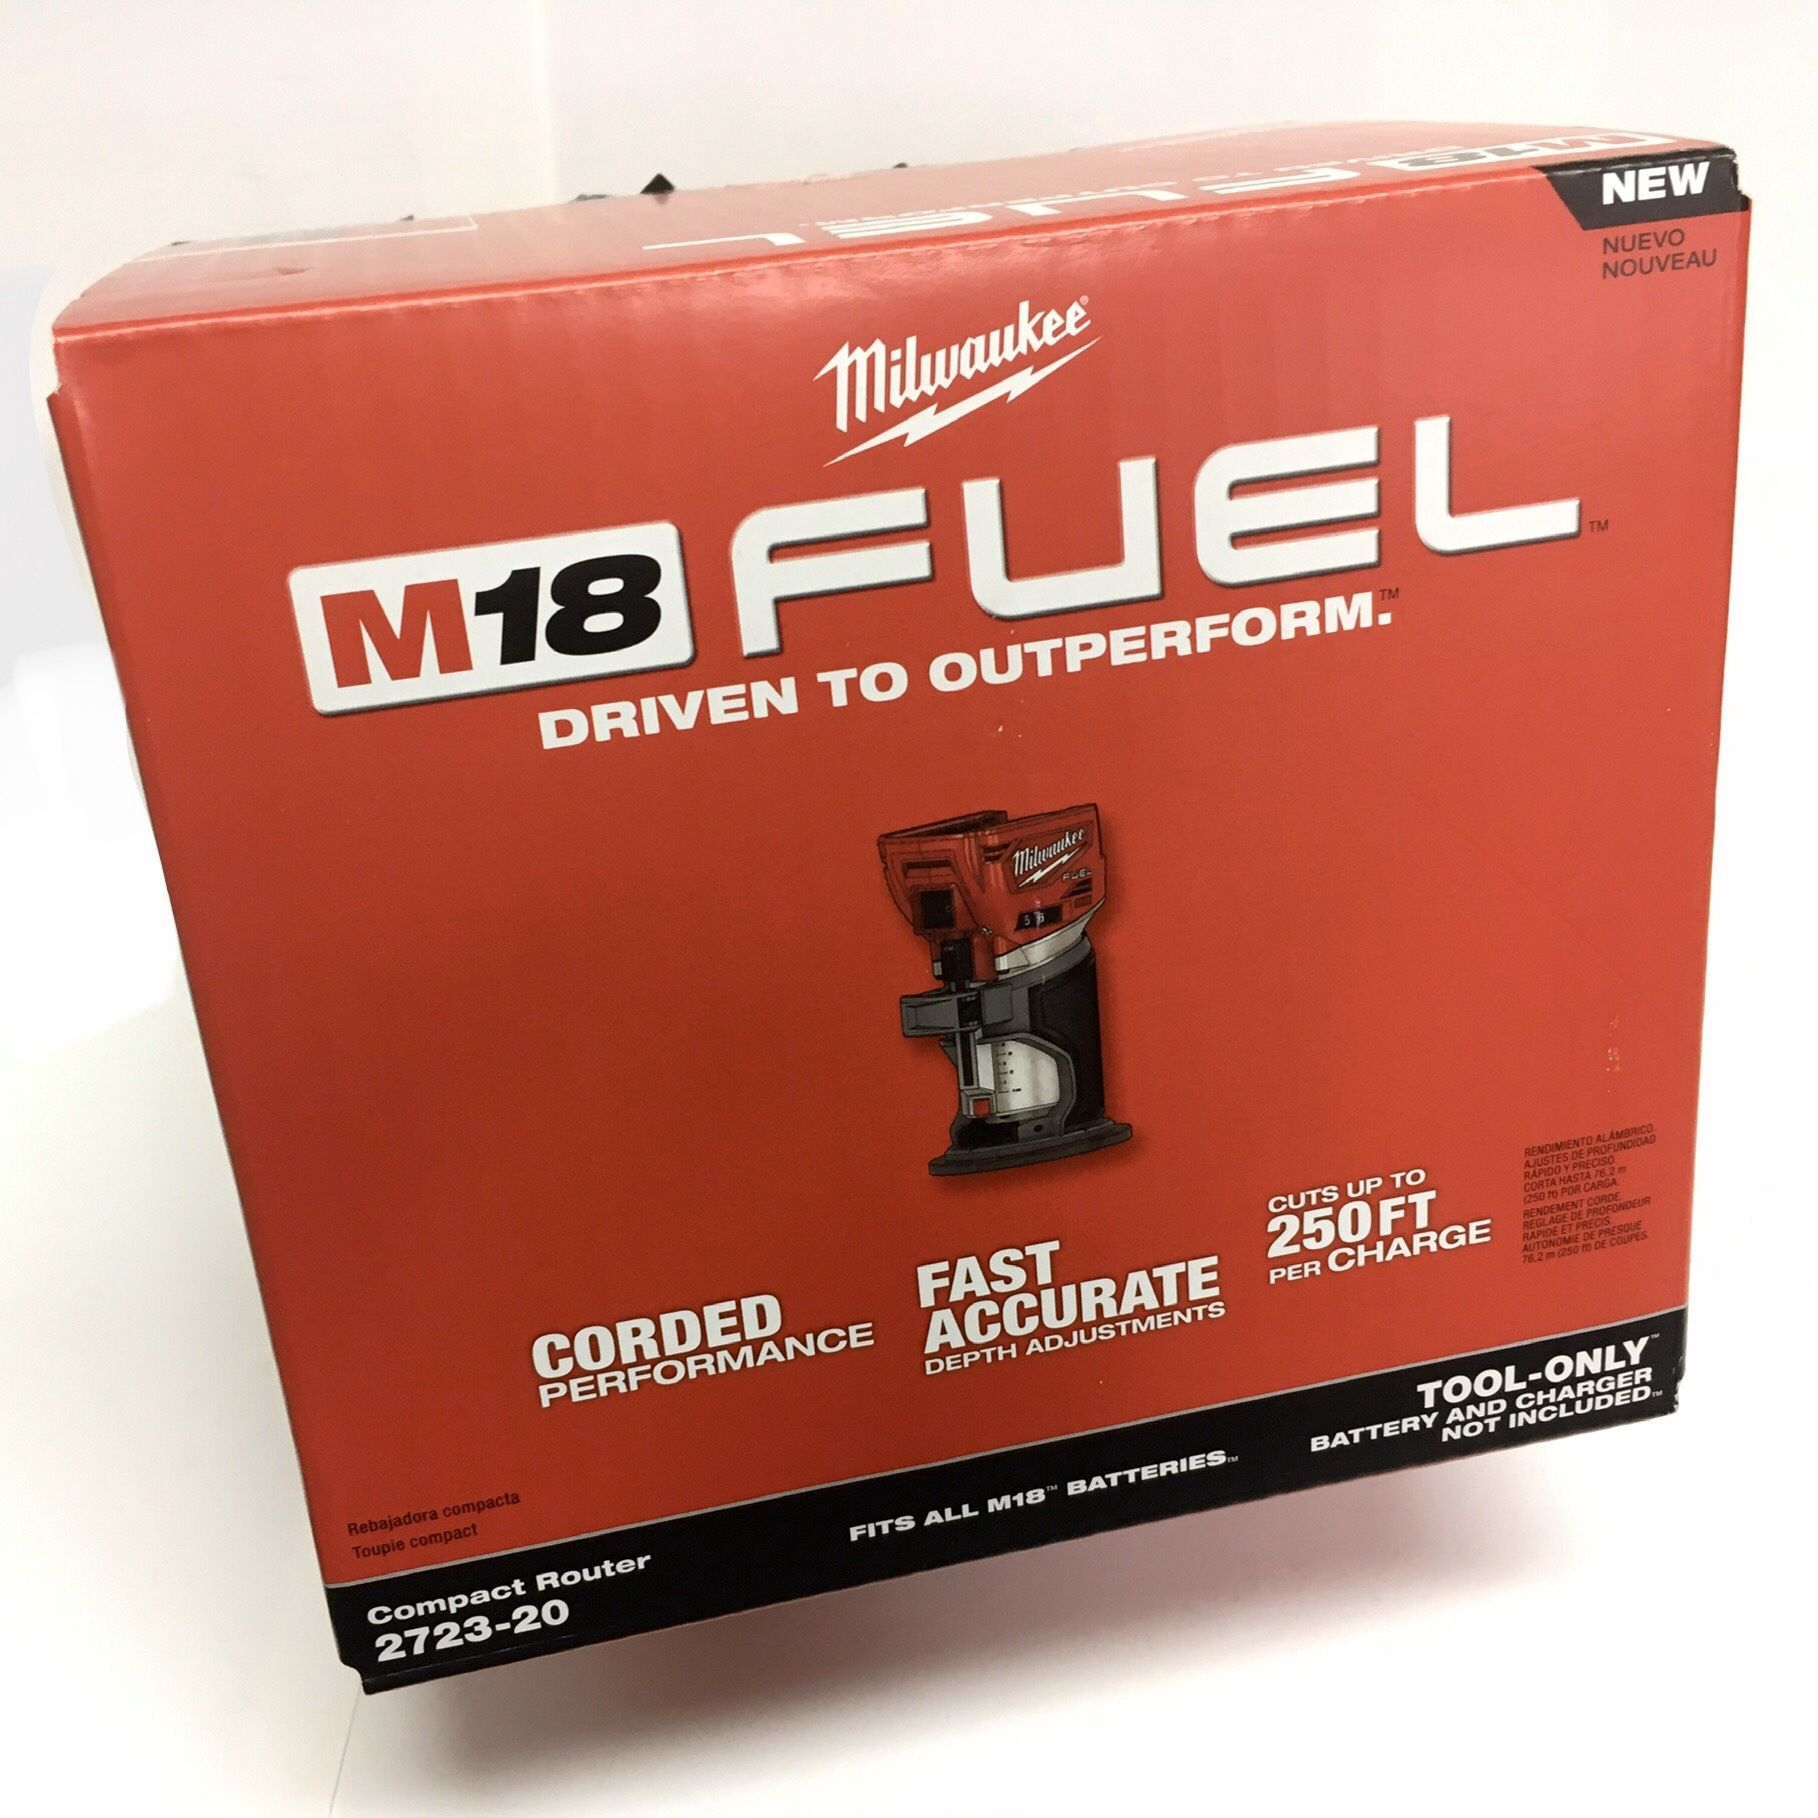 NEW! Milwaukee M18 FUEL Compact Router 18v 18 volt Cordless 2732 20 21 22 2732-20